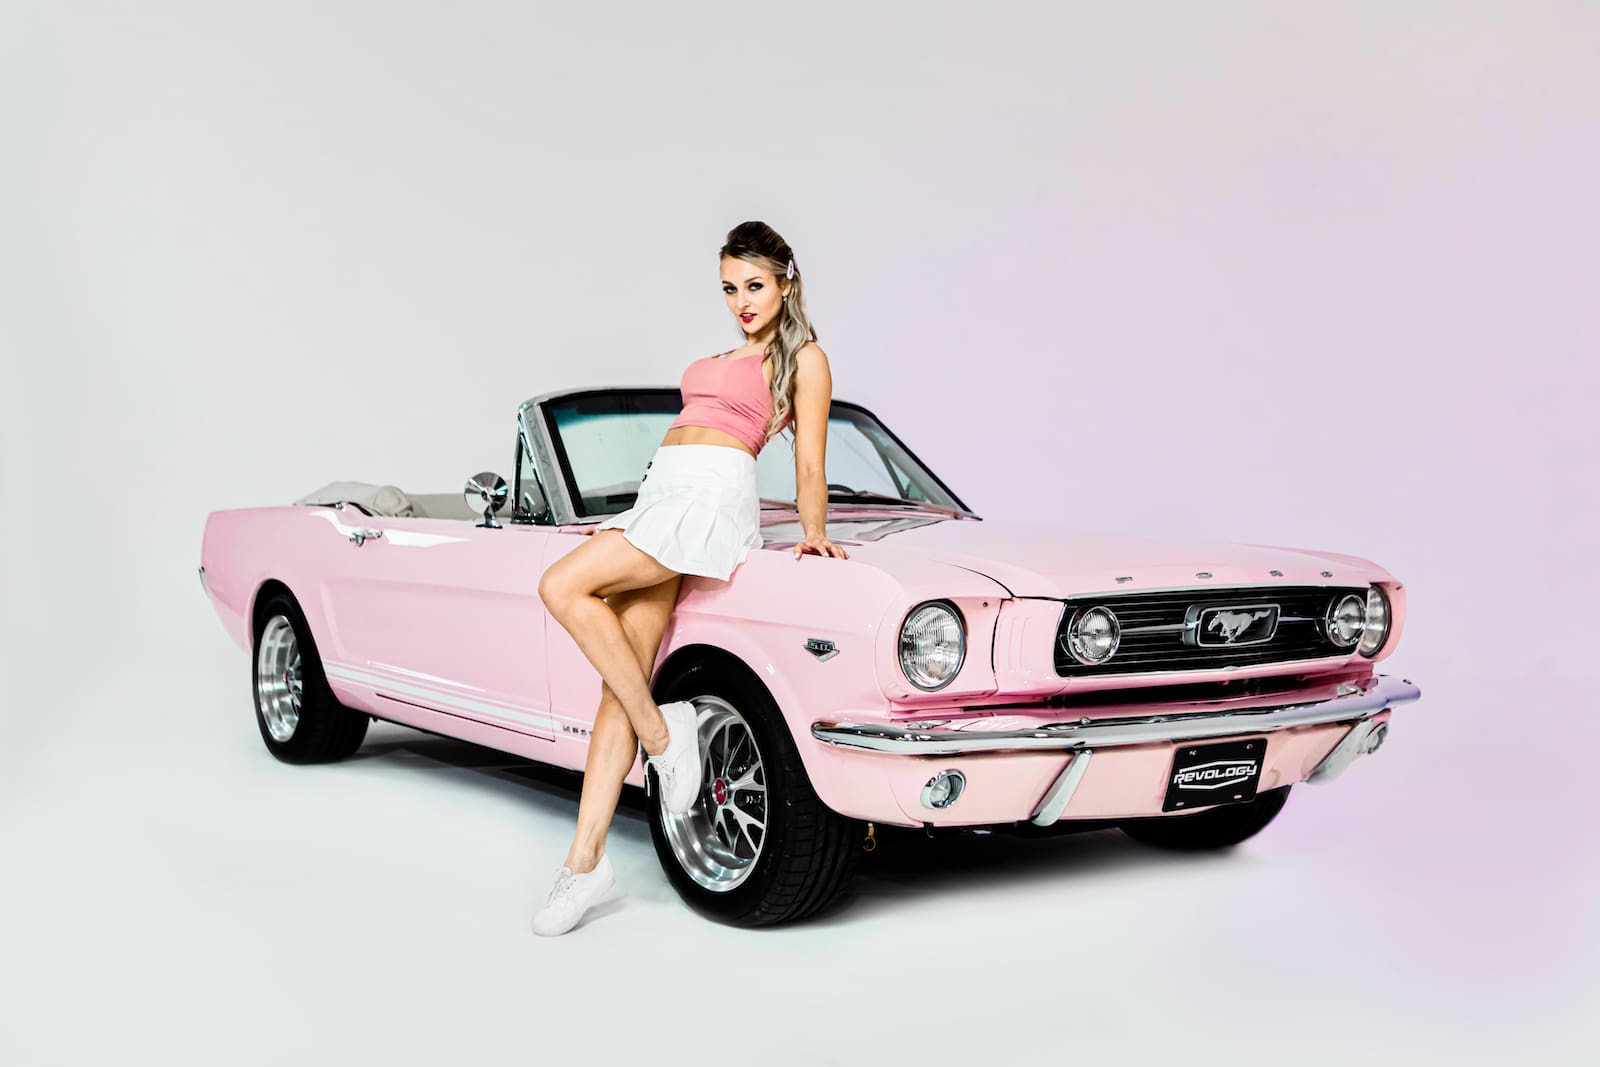 Revology Cars hits its car 100 milestone with a pink, Playboy